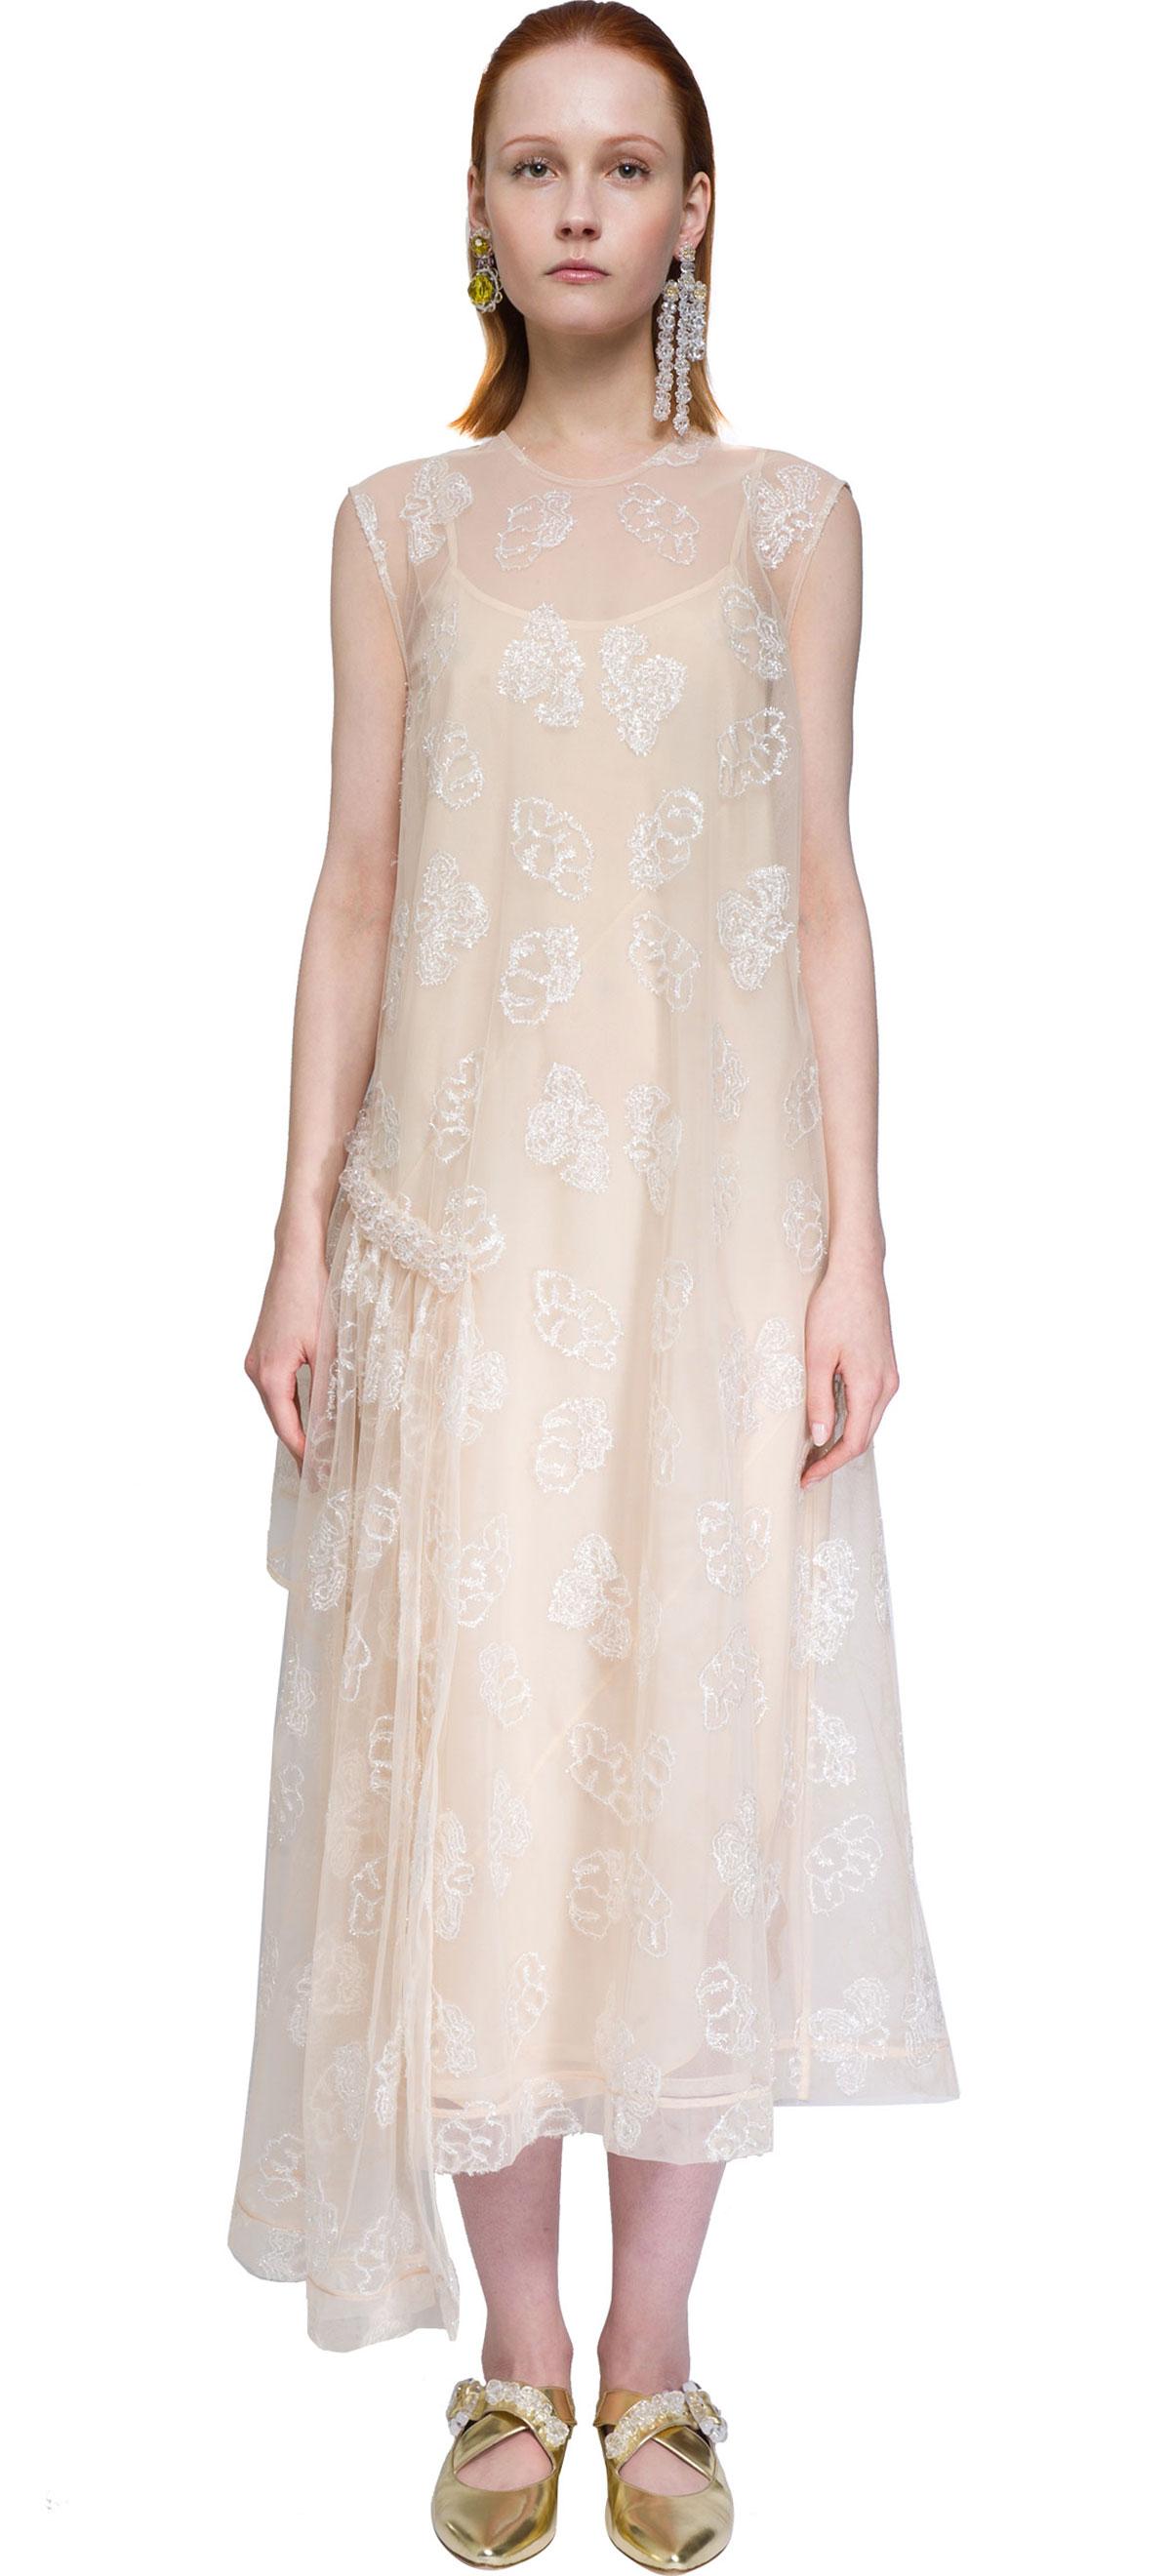 Simone rocha Embroidered Tulle Dress | Lyst